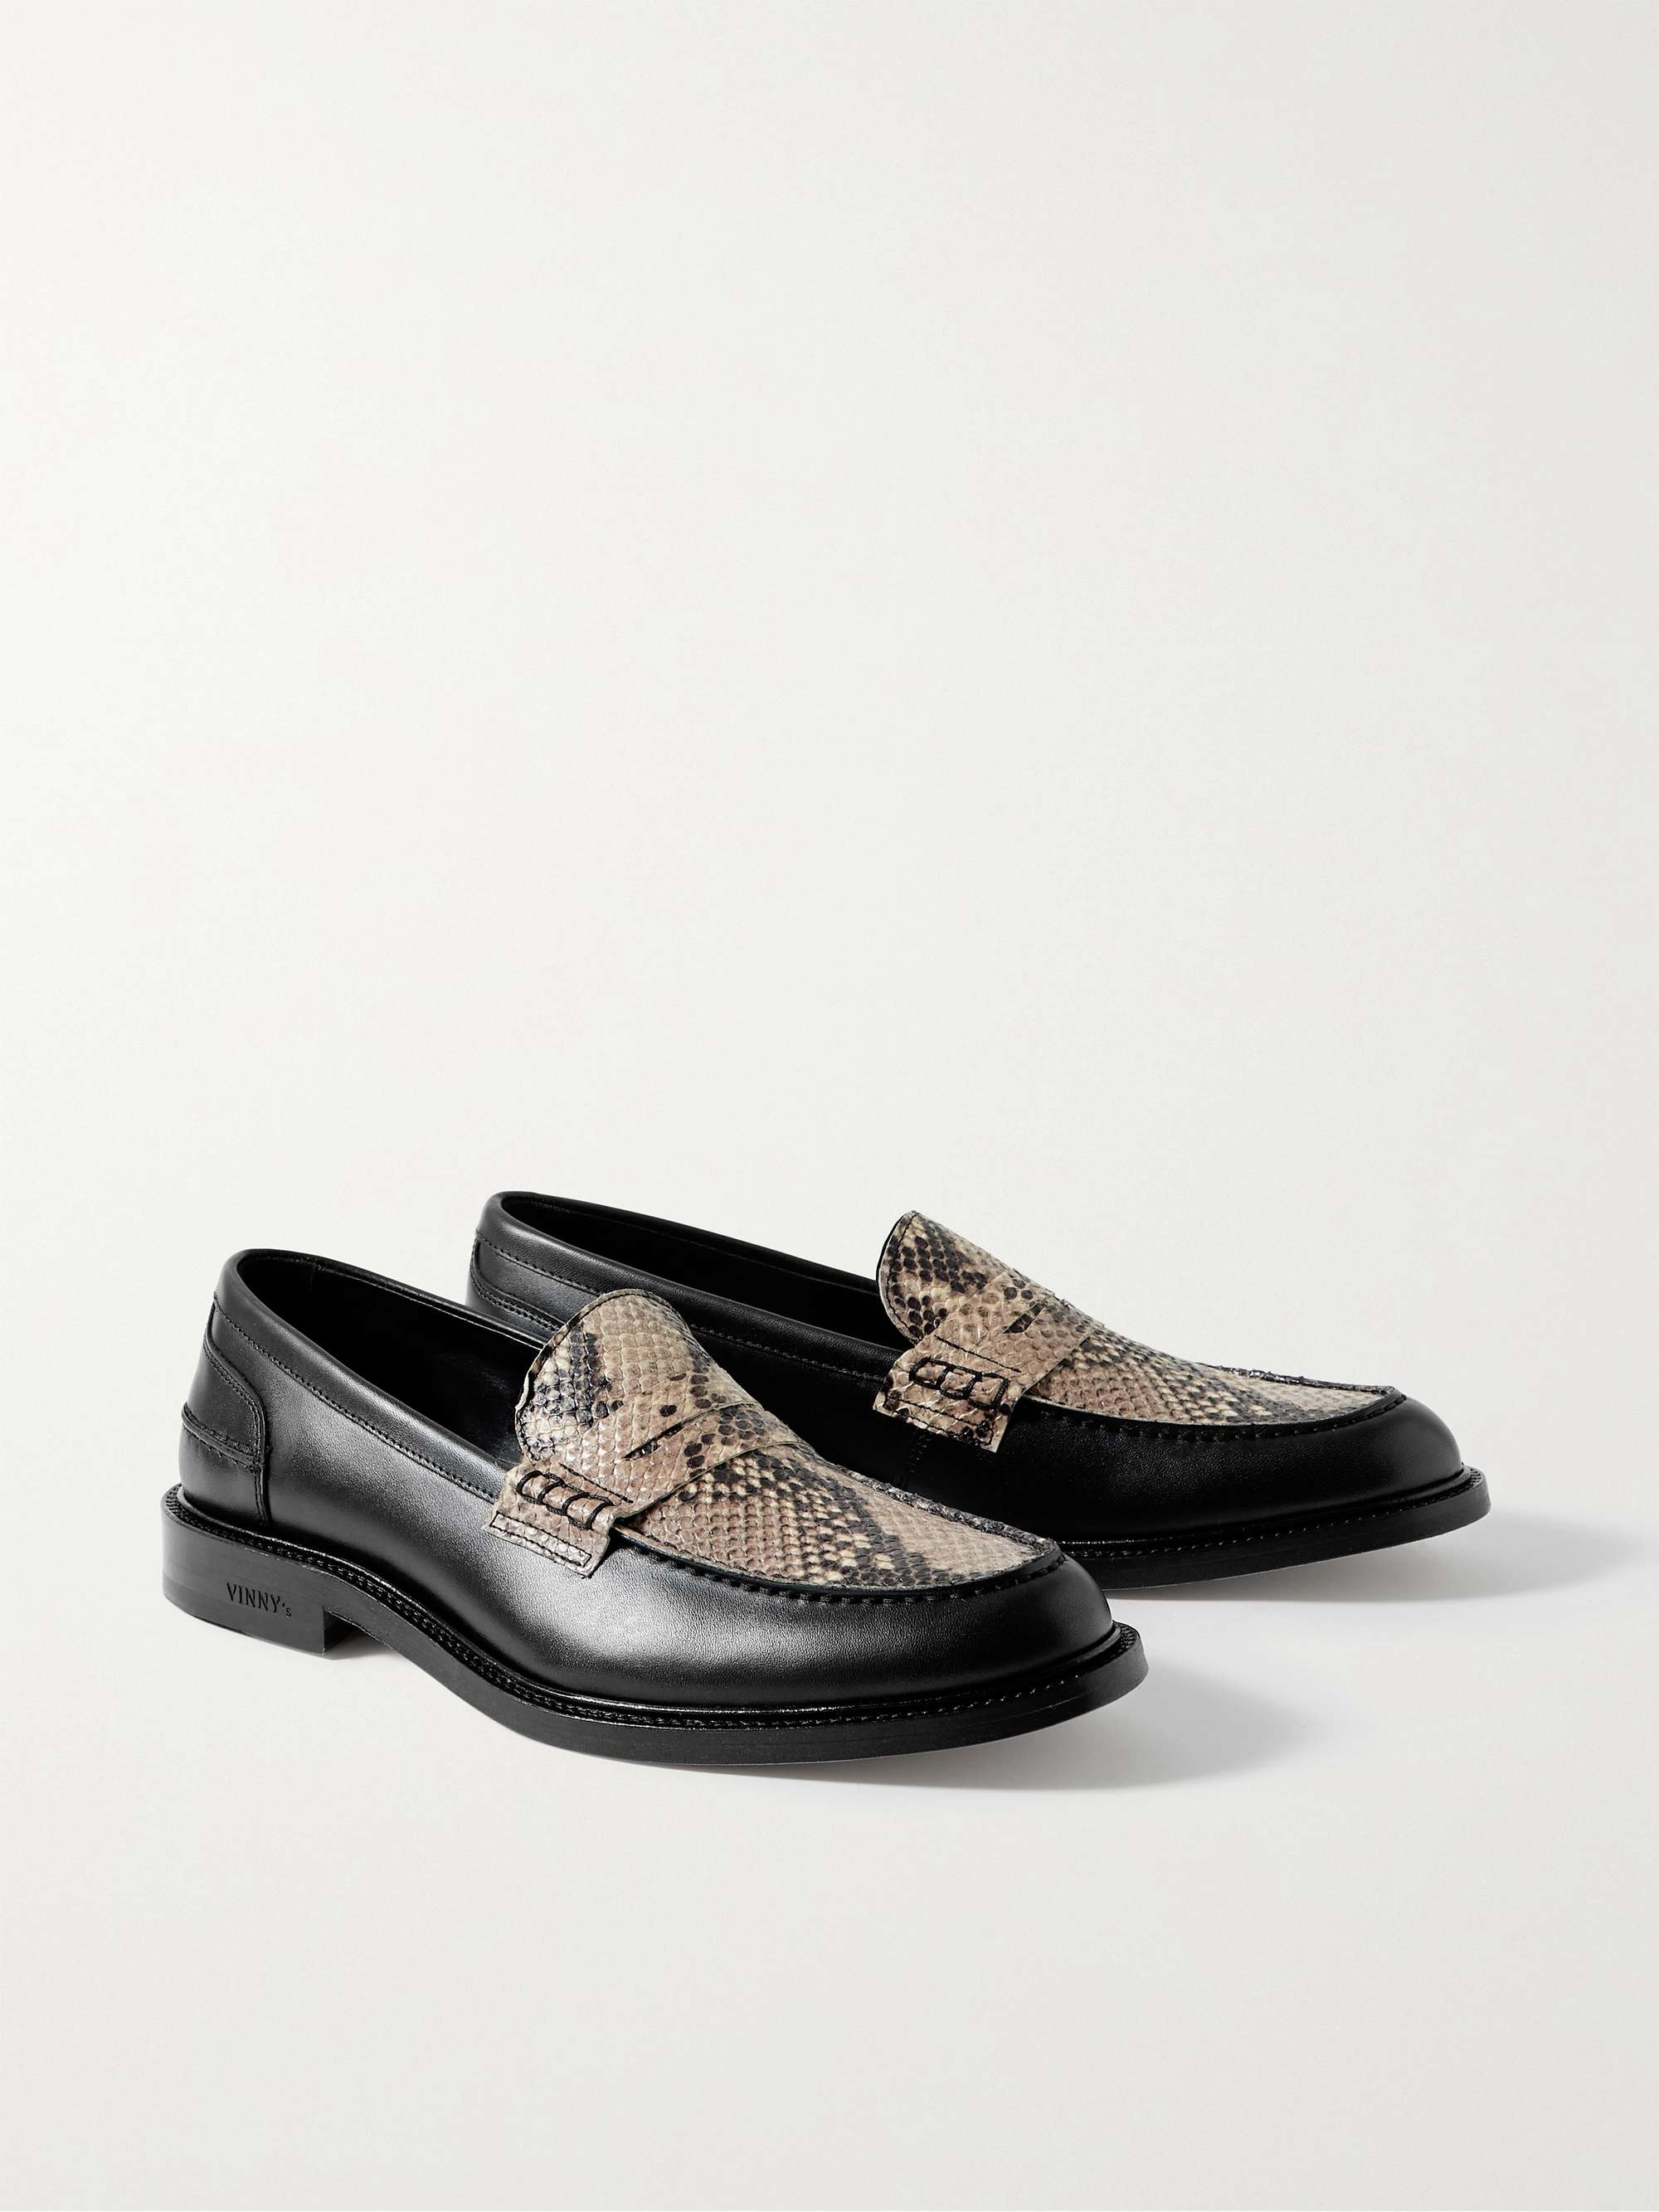 VINNY'S Townee Panelled Snake-Effect Leather Penny Loafers